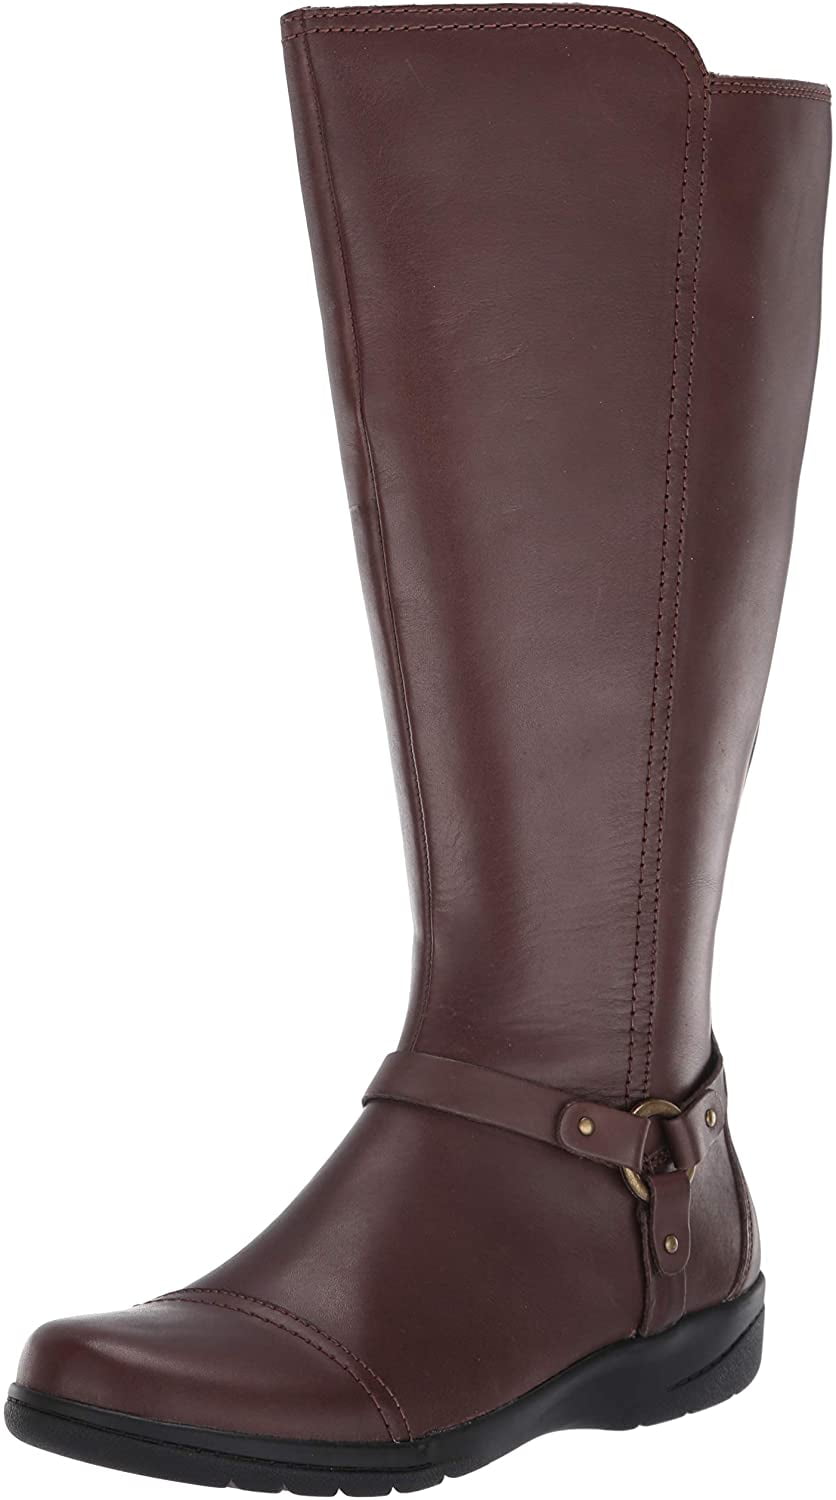 clarks tall boots brown